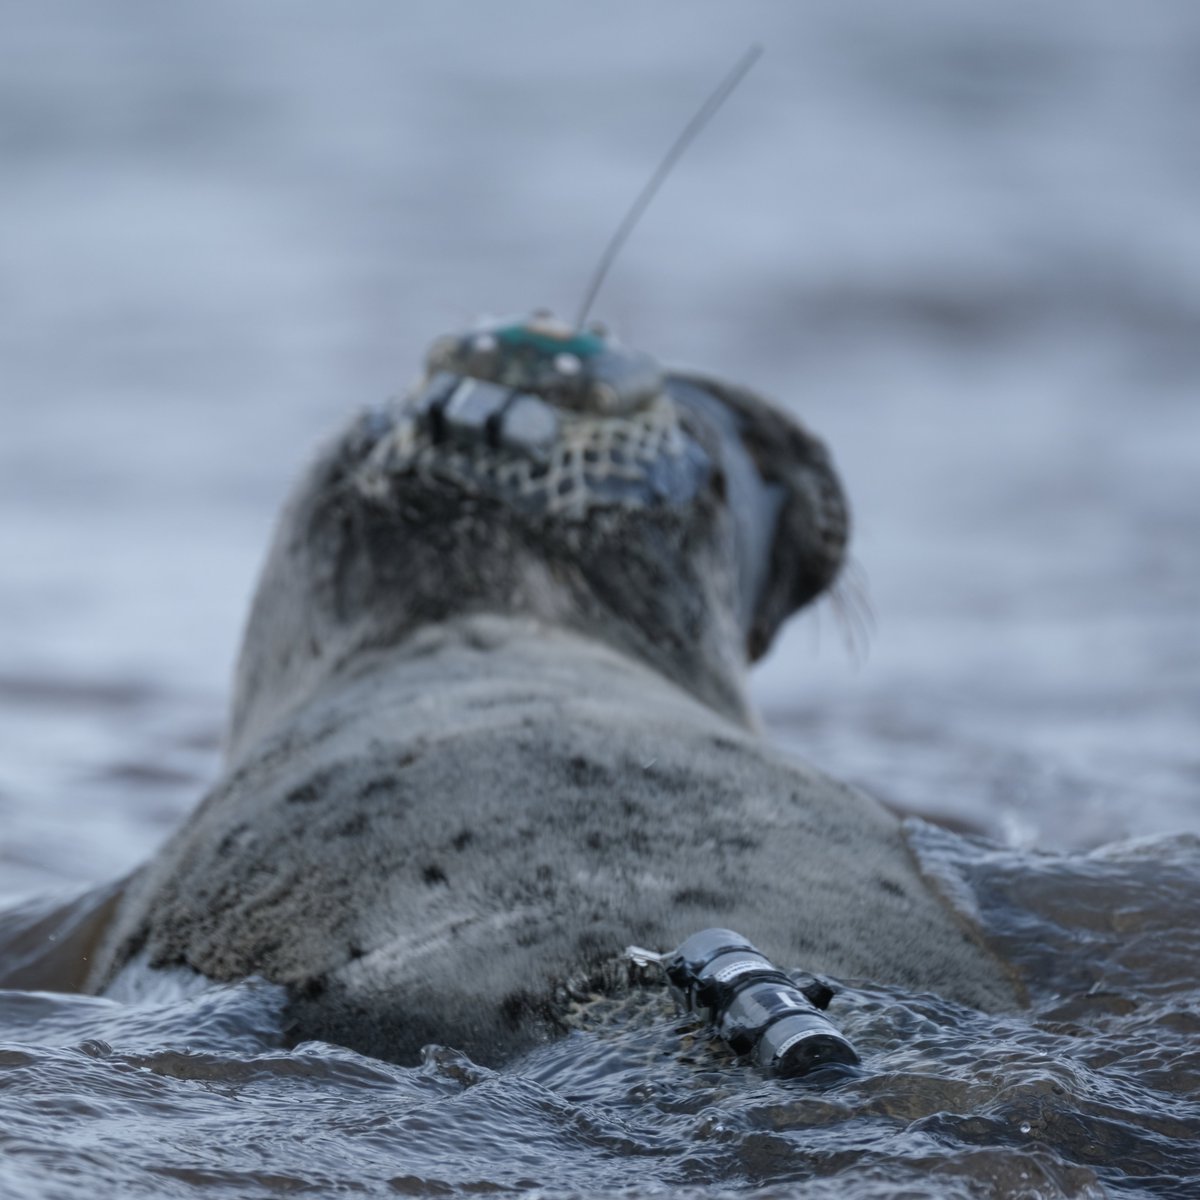 A second successful year of VMT deployments in the Gulf of St. Lawrence to study grey seal – white shark interactions! @DFO_Science @OceanTracking